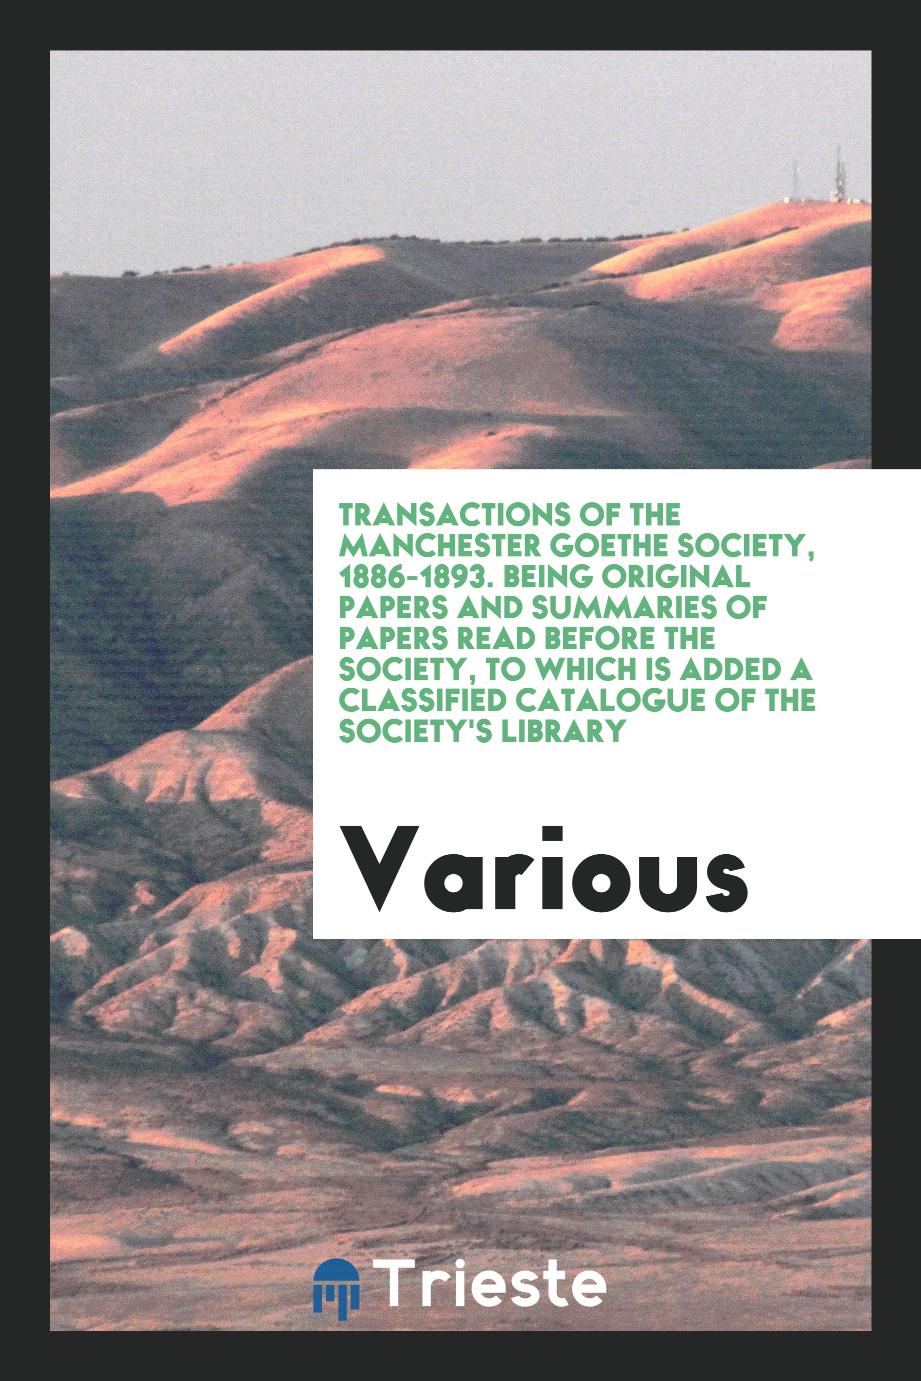 Transactions of the Manchester Goethe Society, 1886-1893. Being Original Papers and Summaries of Papers Read Before the Society, to Which Is Added a Classified Catalogue of the Society's Library